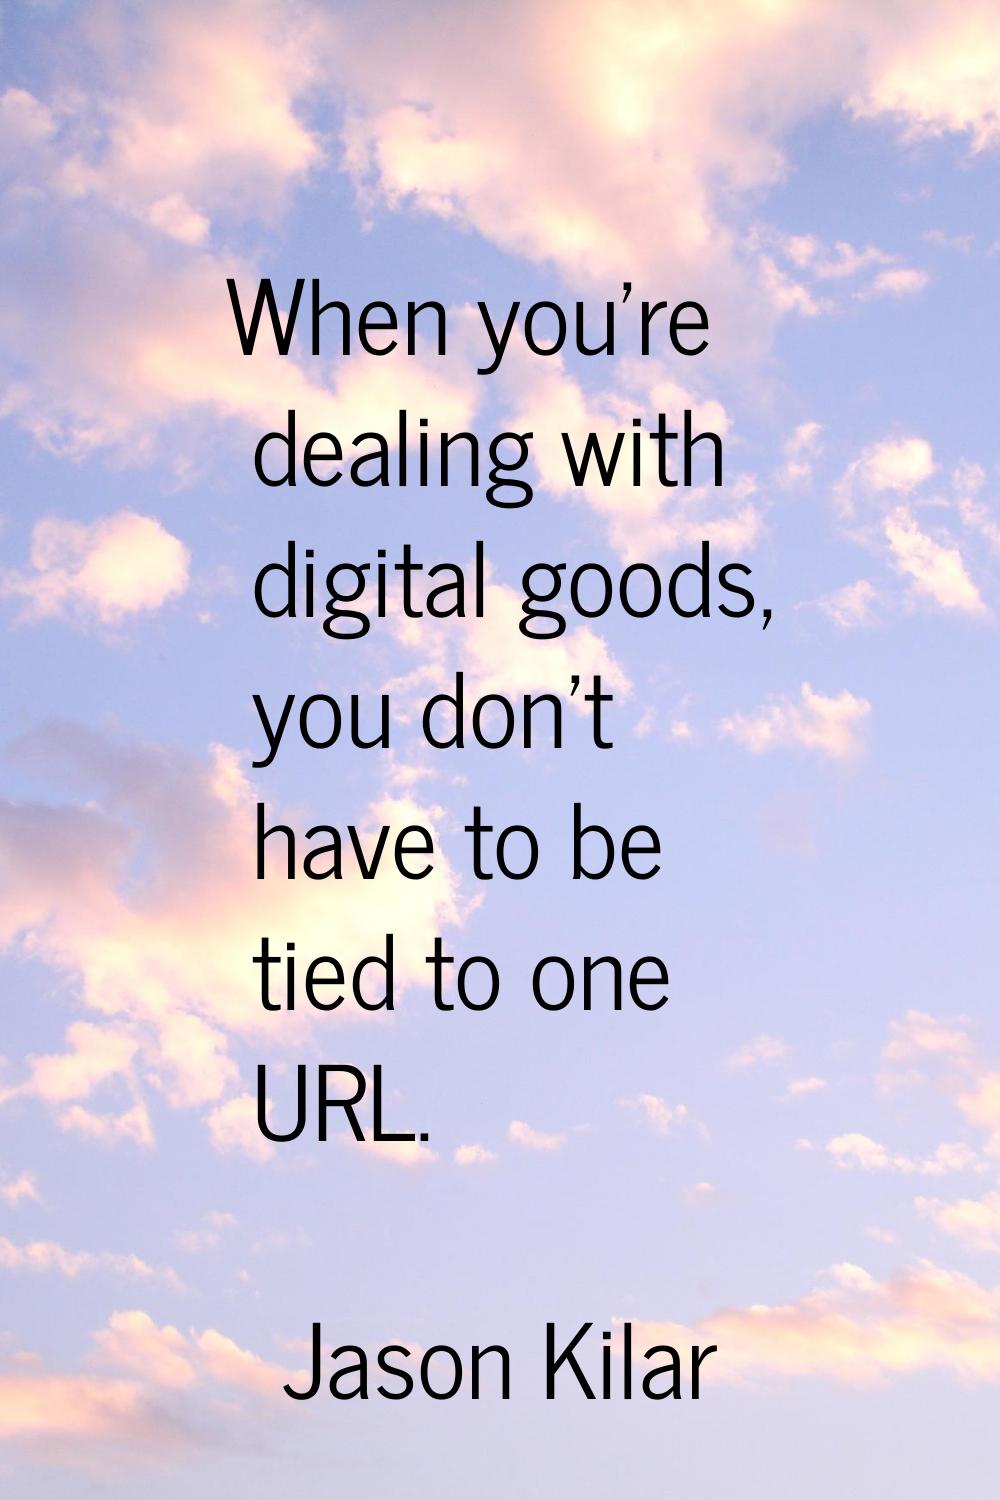 When you're dealing with digital goods, you don't have to be tied to one URL.